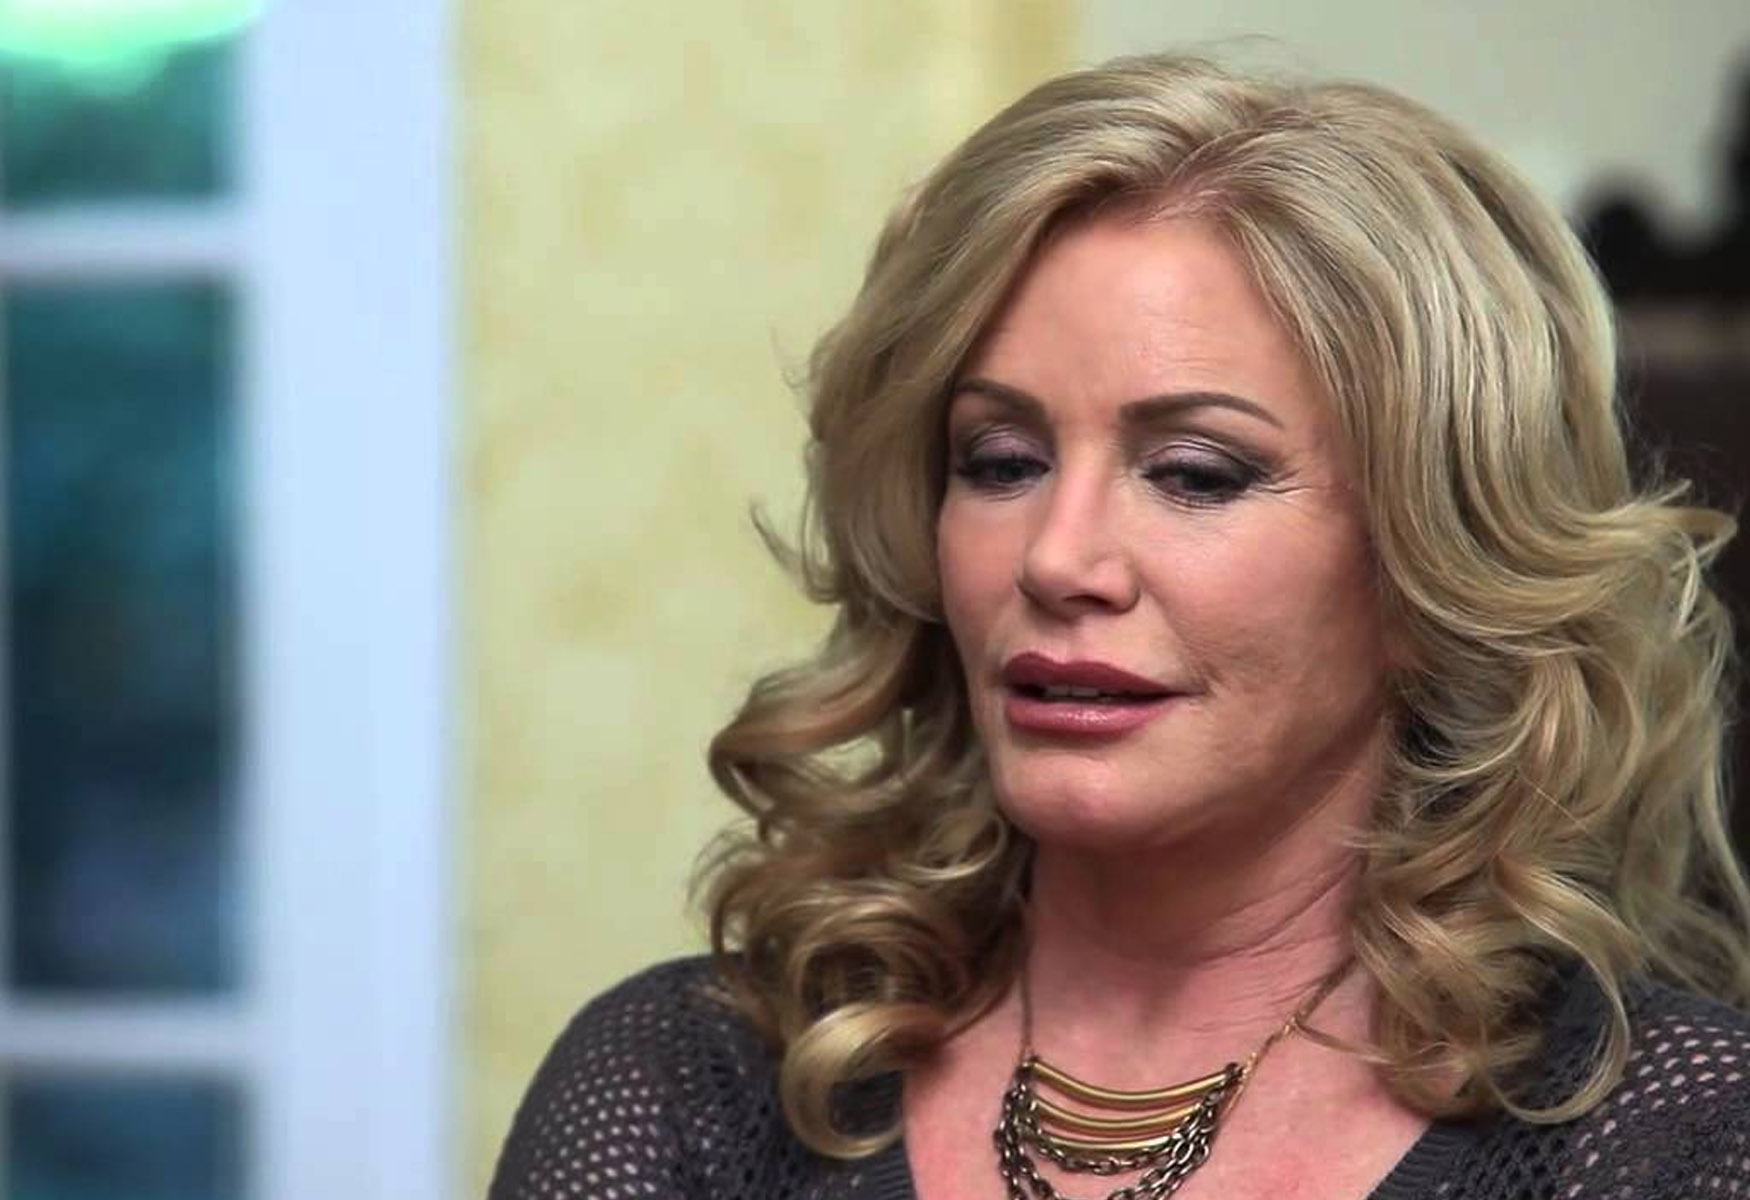 11 Intriguing Facts About Shannon Tweed - Facts.net